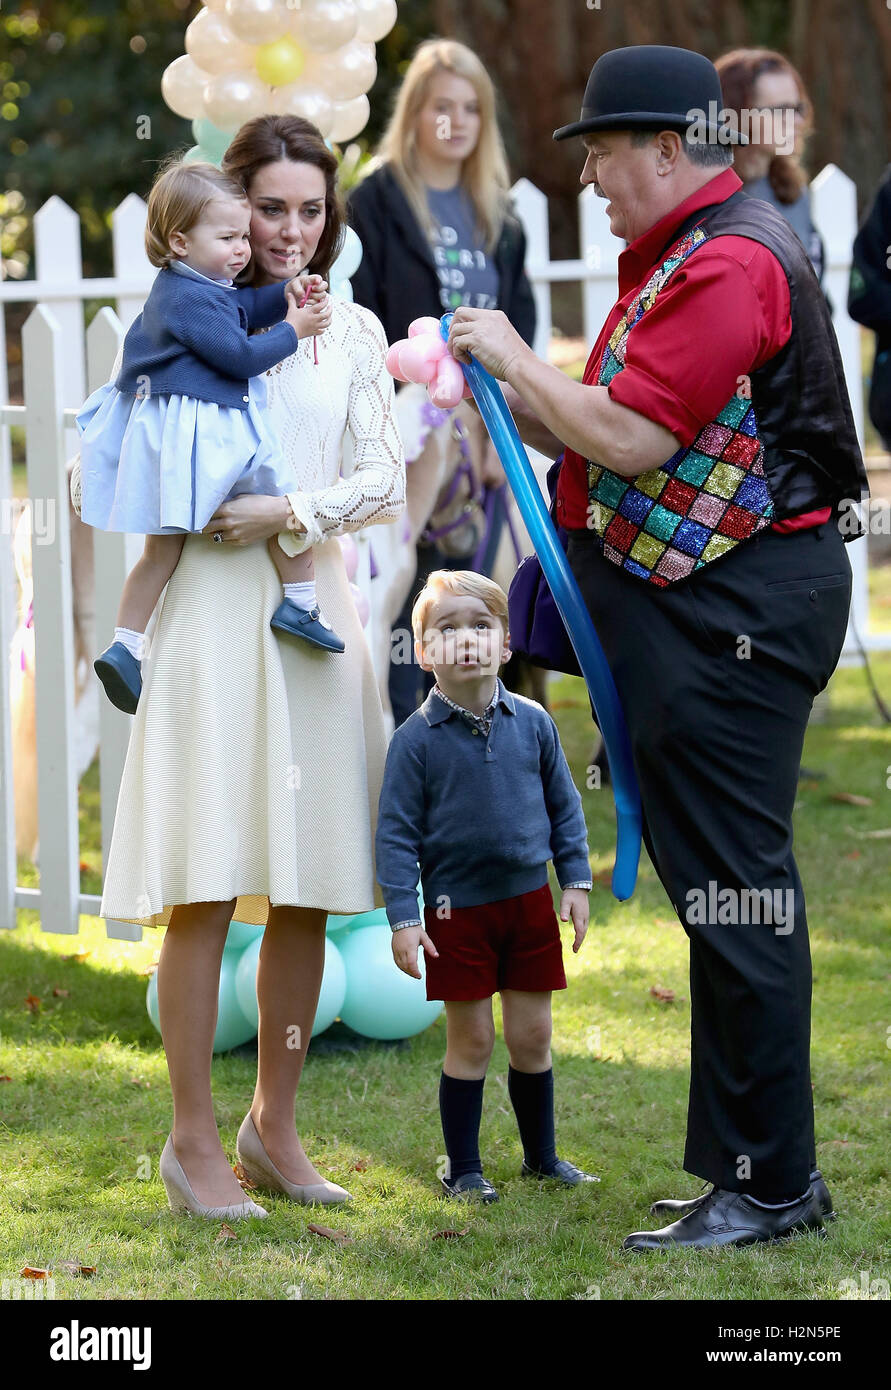 The Duchess Of Cambridge With Her Children Prince George And Princess Charlotte At A Children S Party For Military Families At Government House In Victoria During The Royal Tour Of Canada Stock Photo